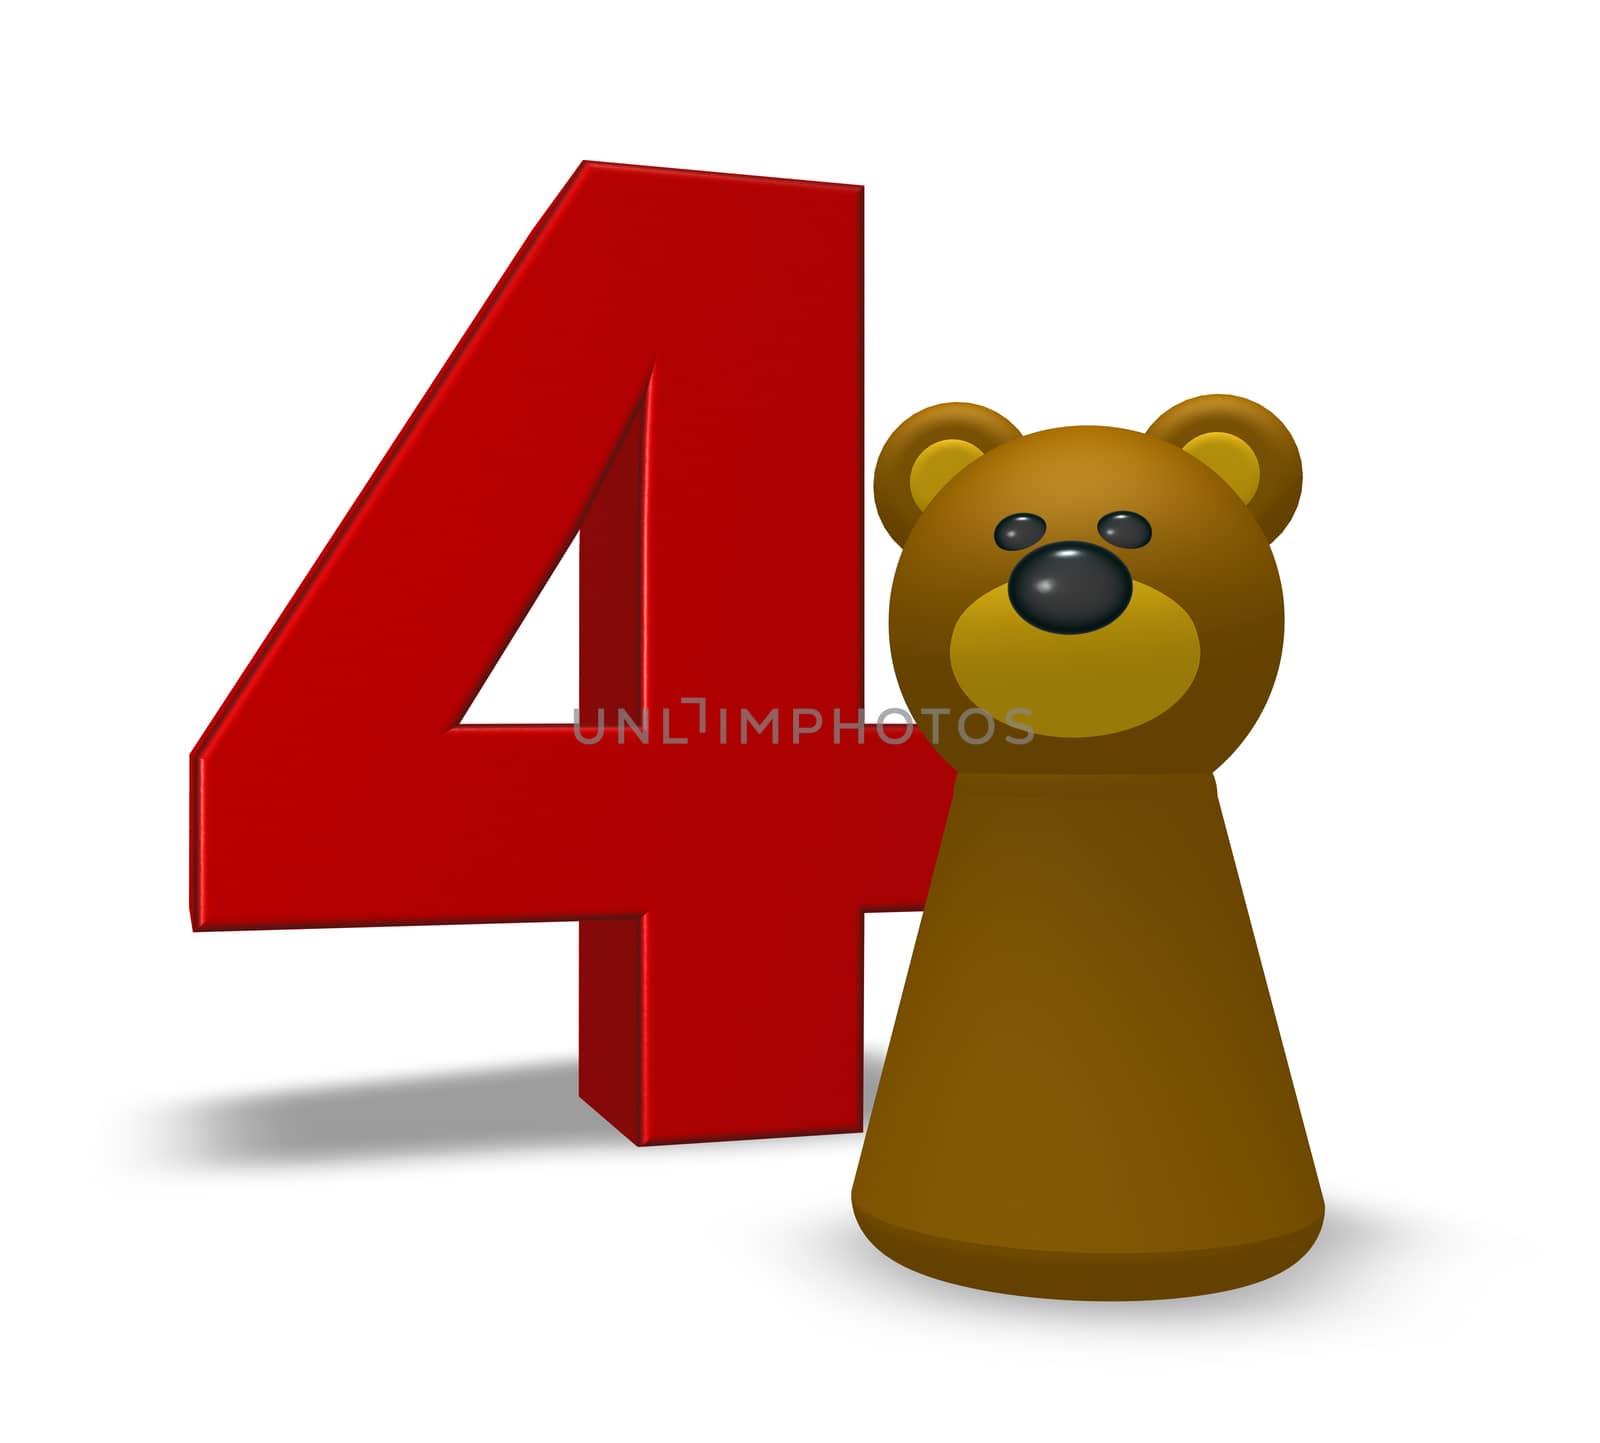 number four and brown bear - 3d illustration